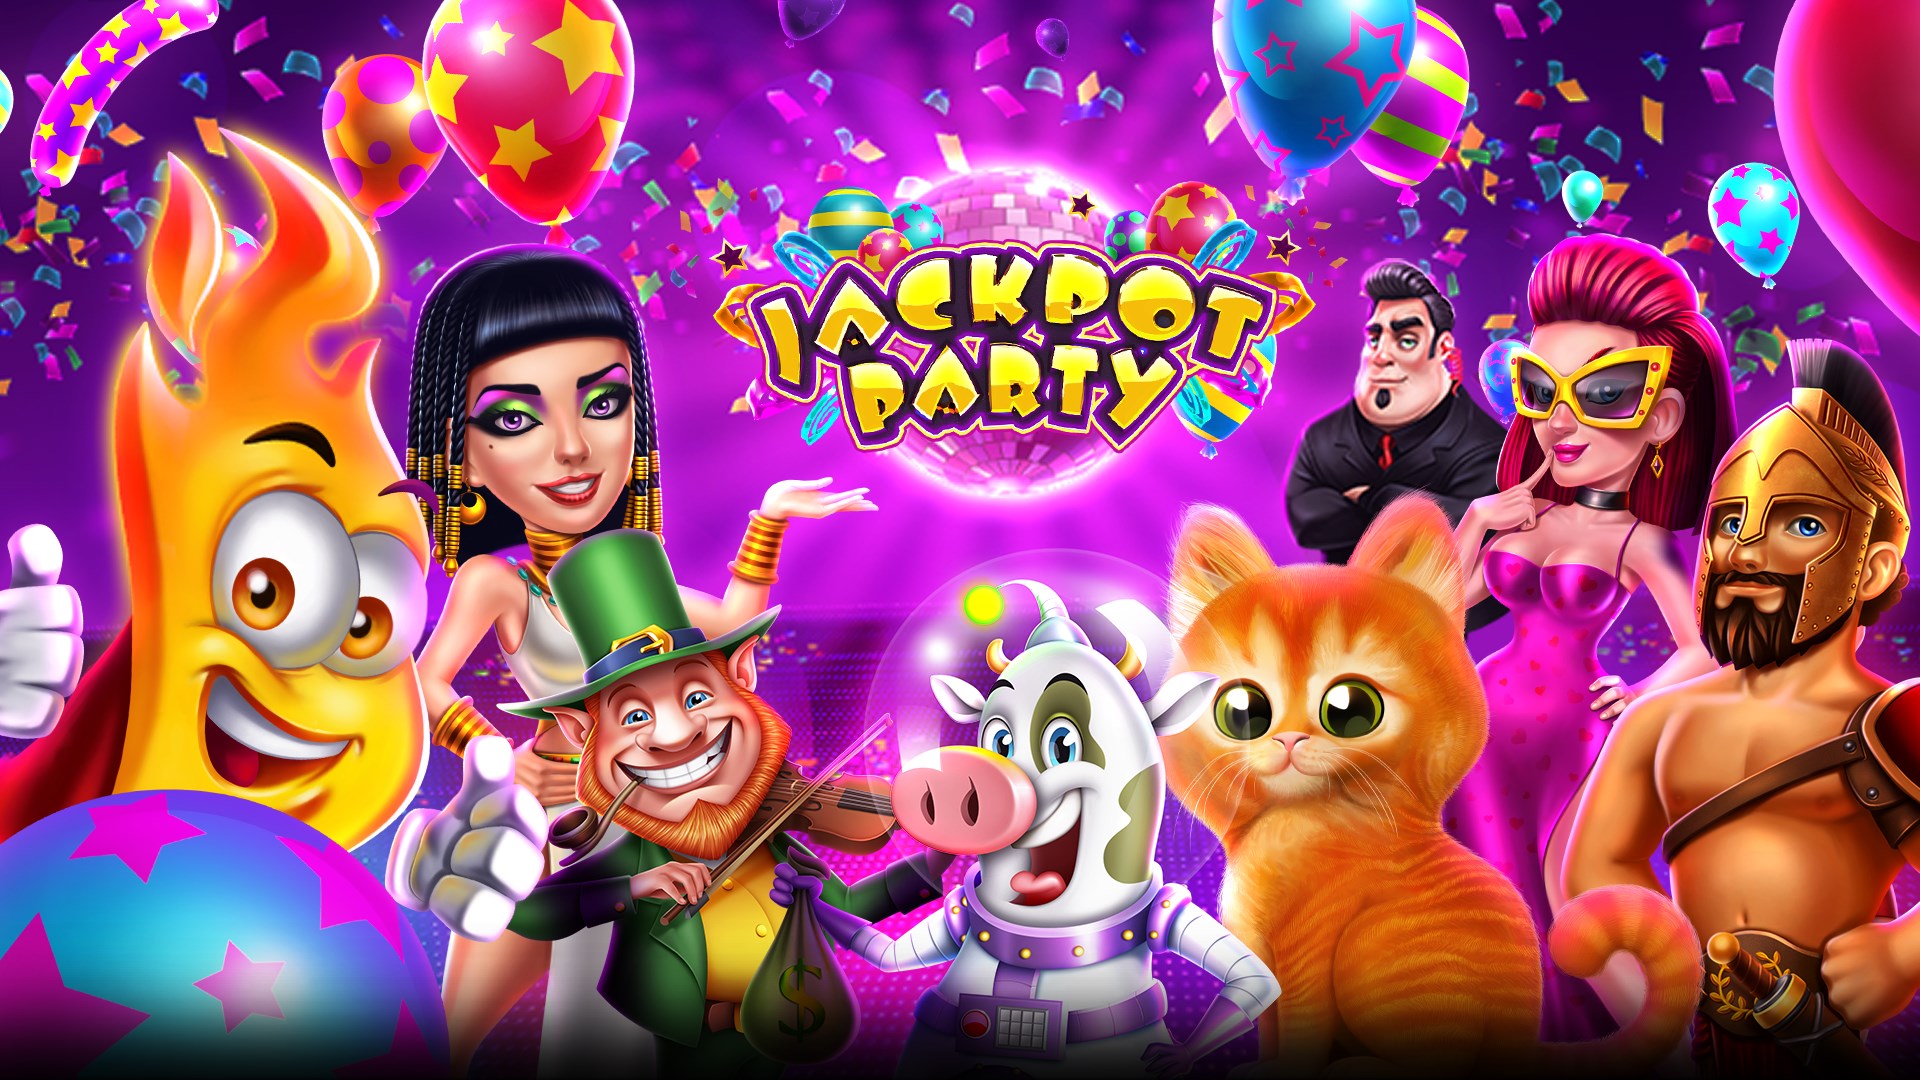 jackpot party casino game